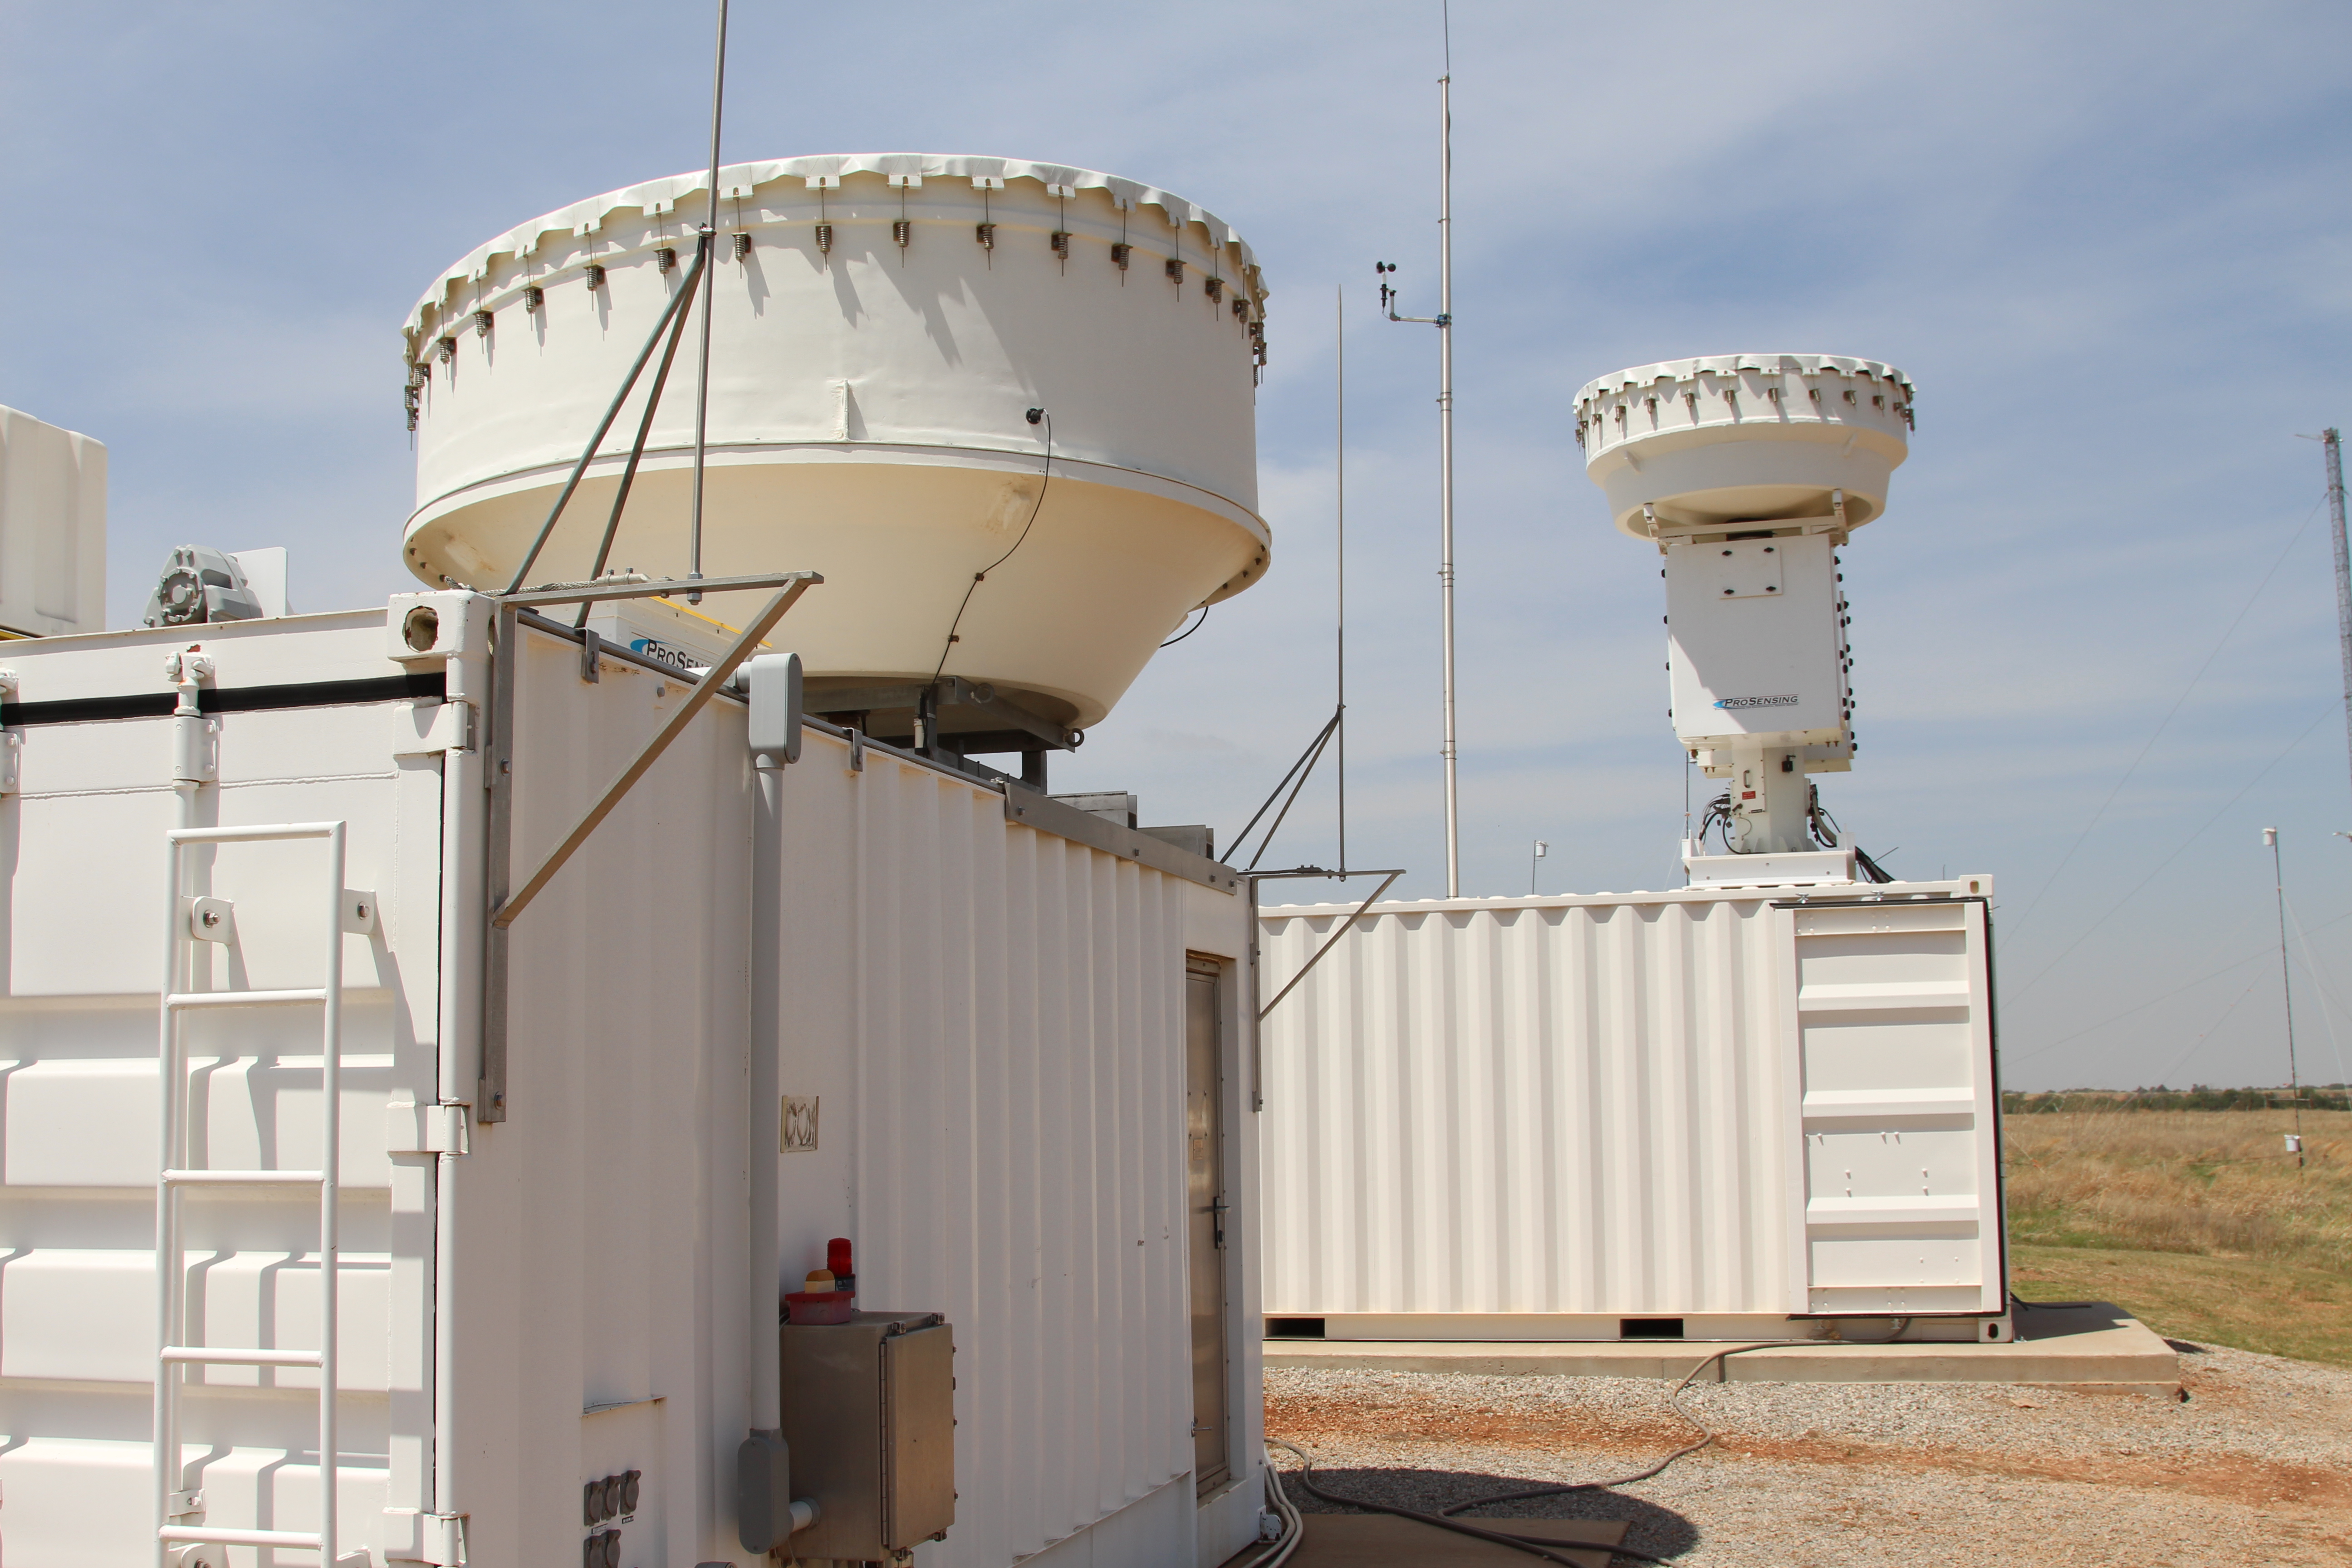 Radar row at the Southern Great Plains Central Facility is a series of radars and lidars used to measure a variety of atmospheric properties.